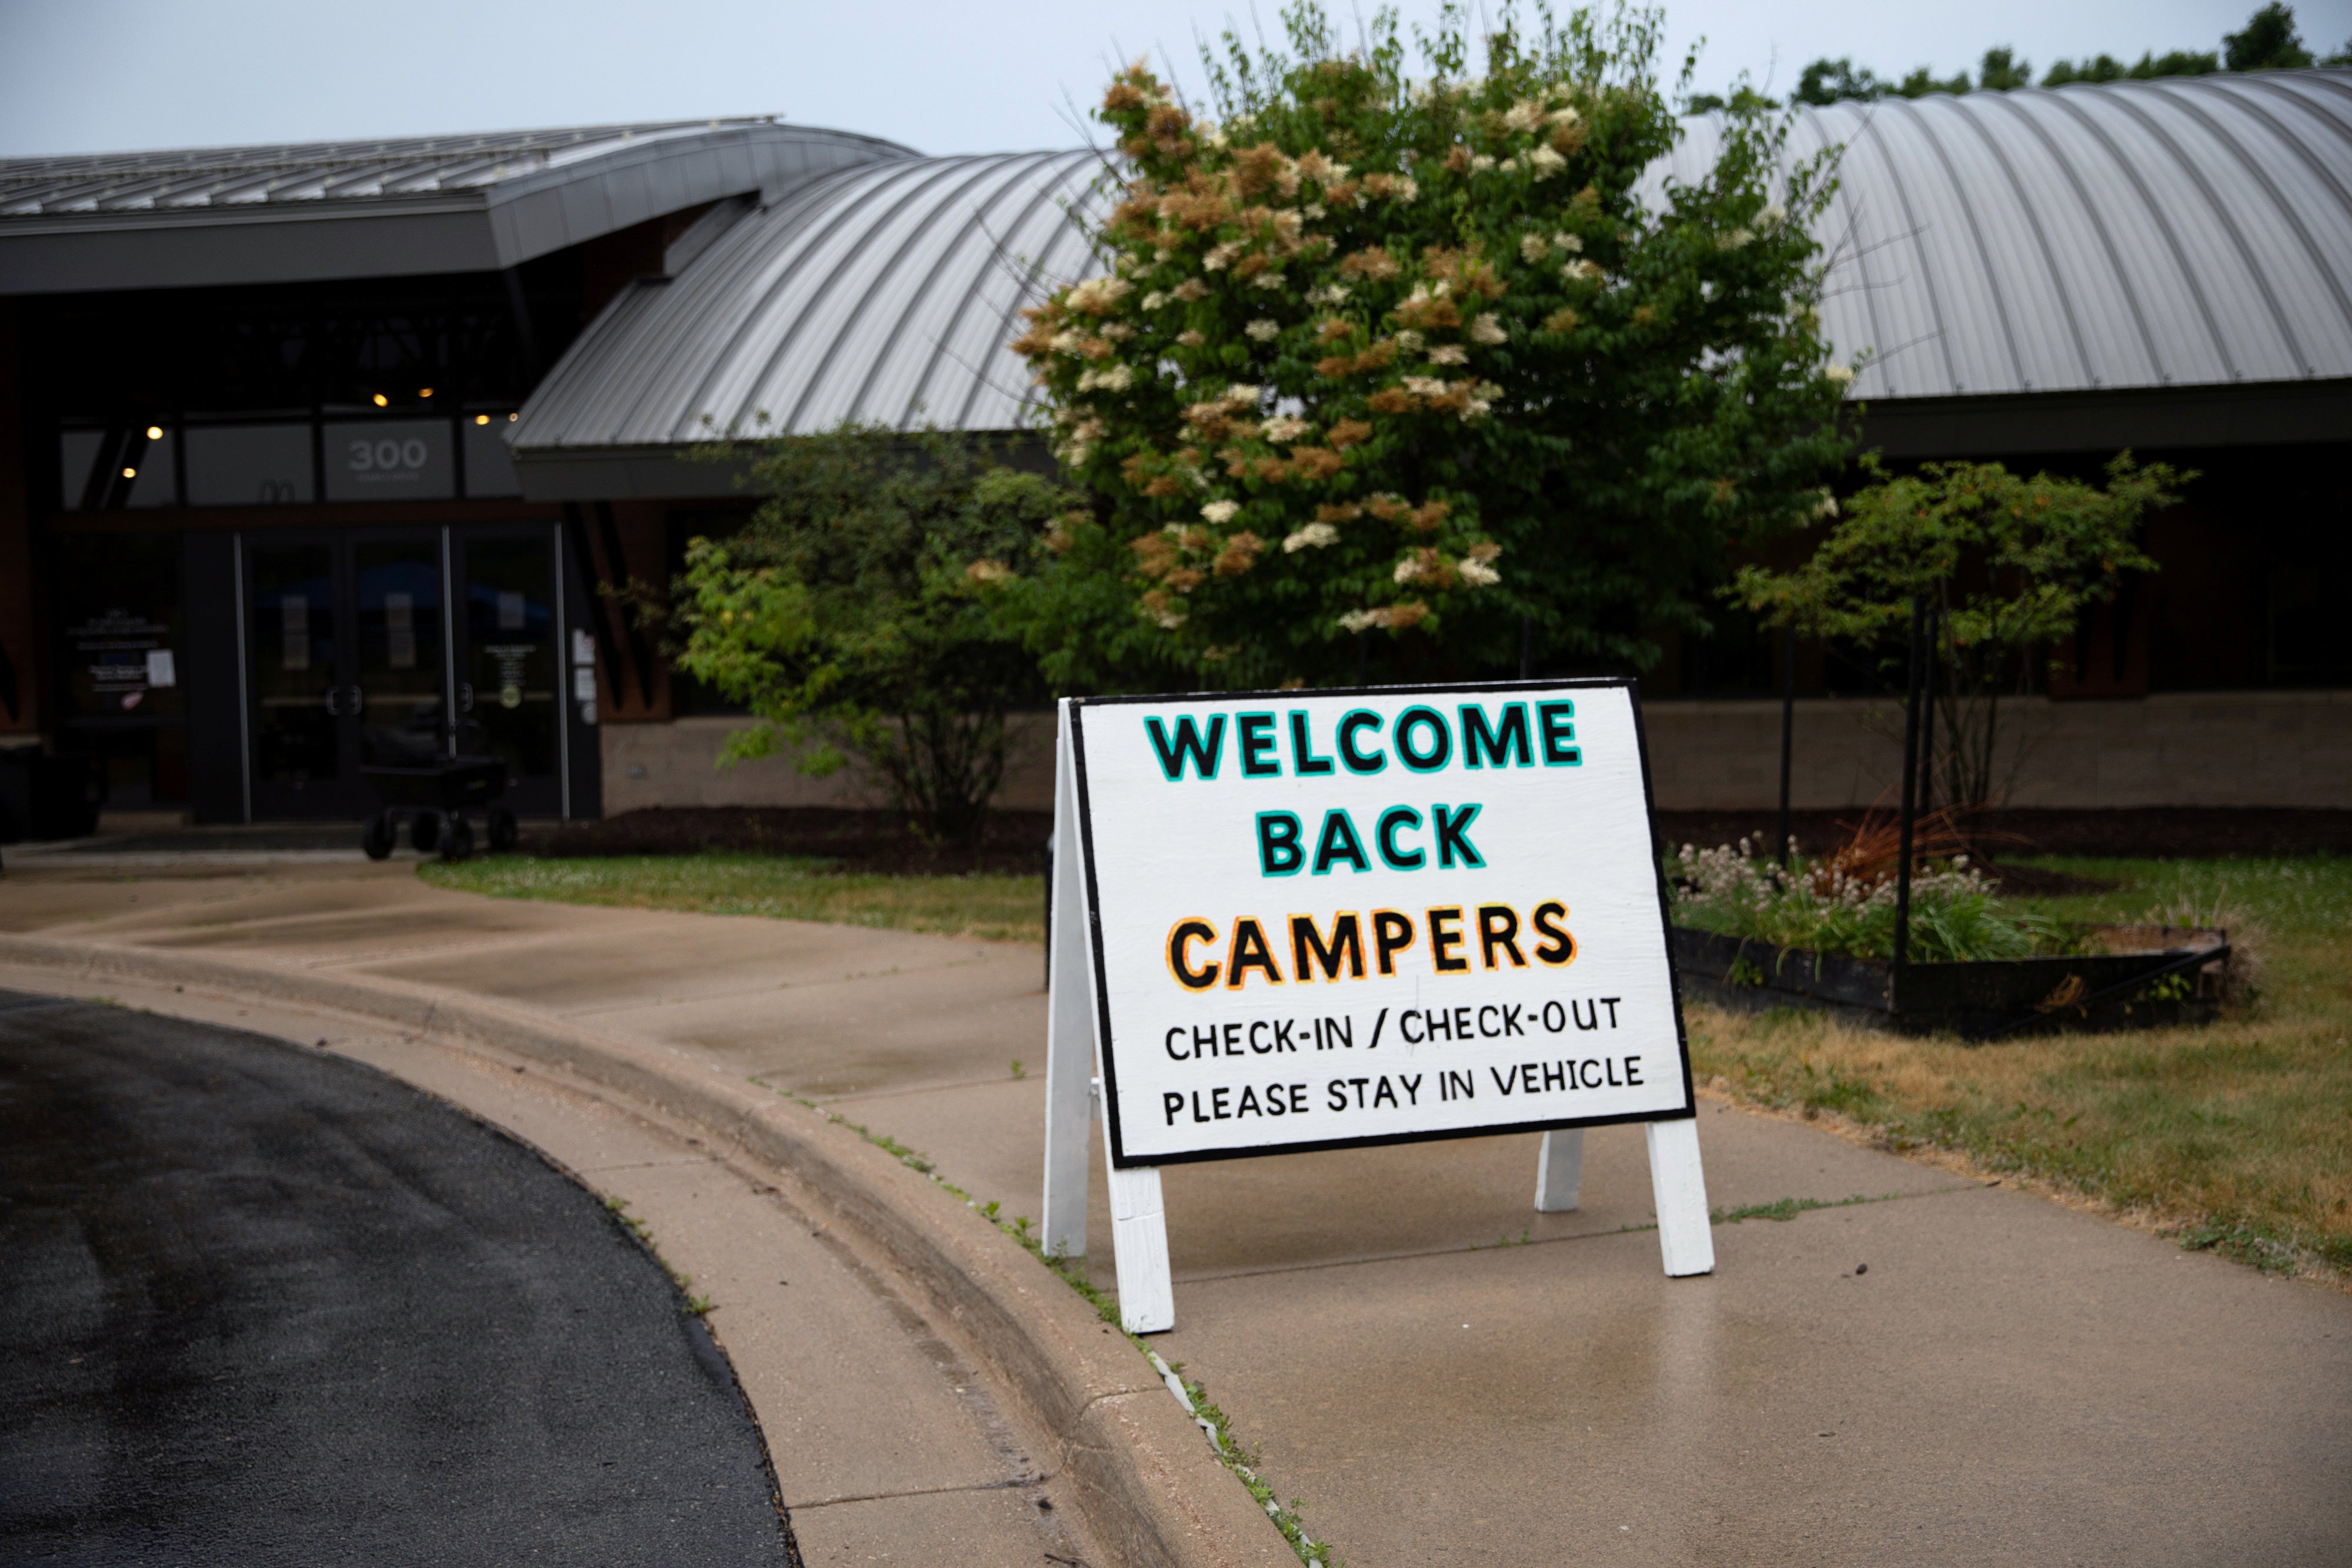 Children arrive for check-in amid the coronavirus pandemic at Carls Family YMCA summer camp in Milford, Michigan on June 23, 2020. 